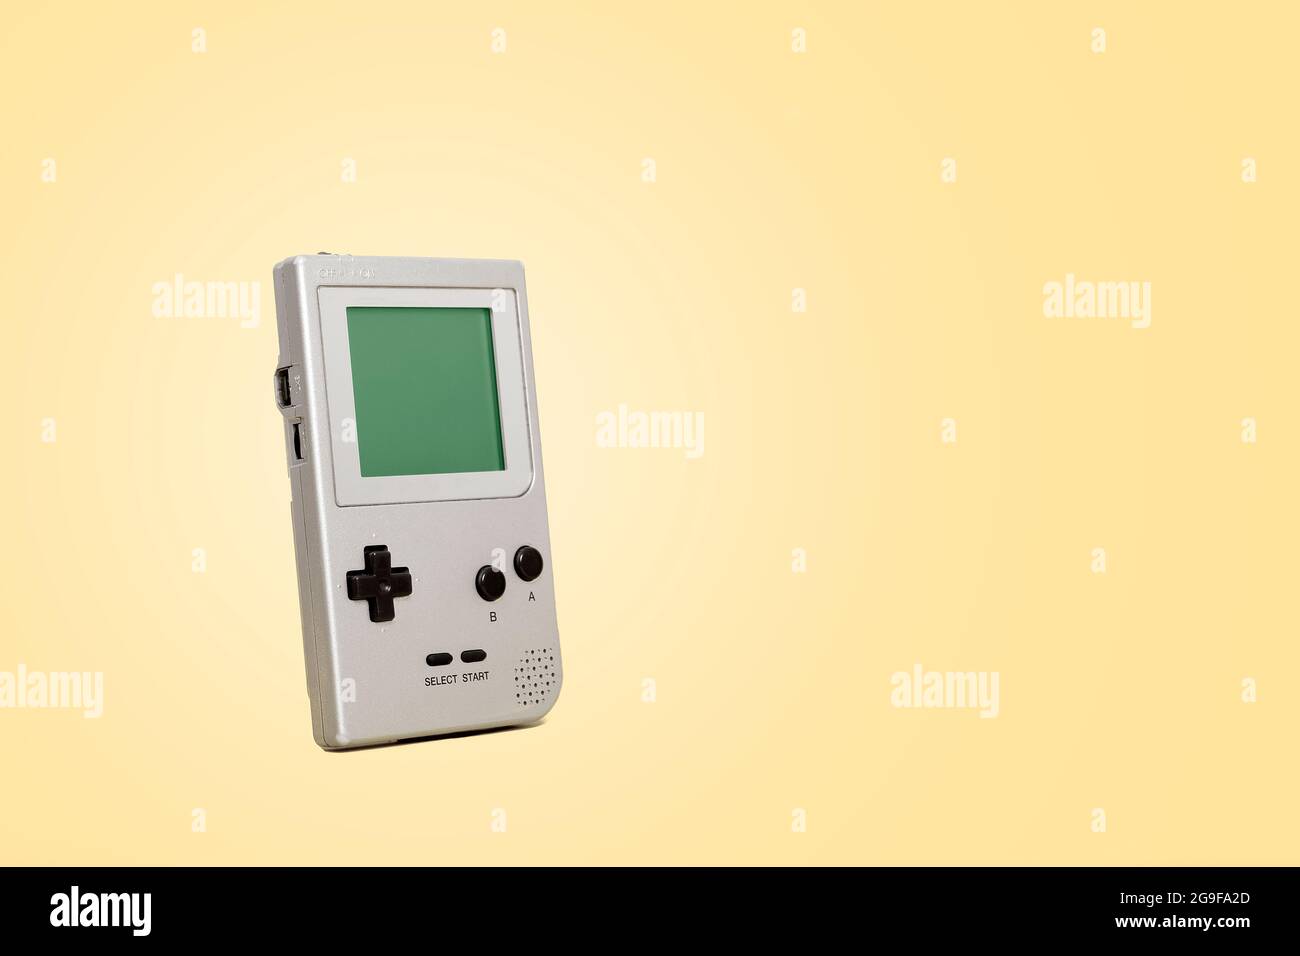 Retro vintage hand held games console on a vintage yellow background with copy space and room for text. Stock Photo